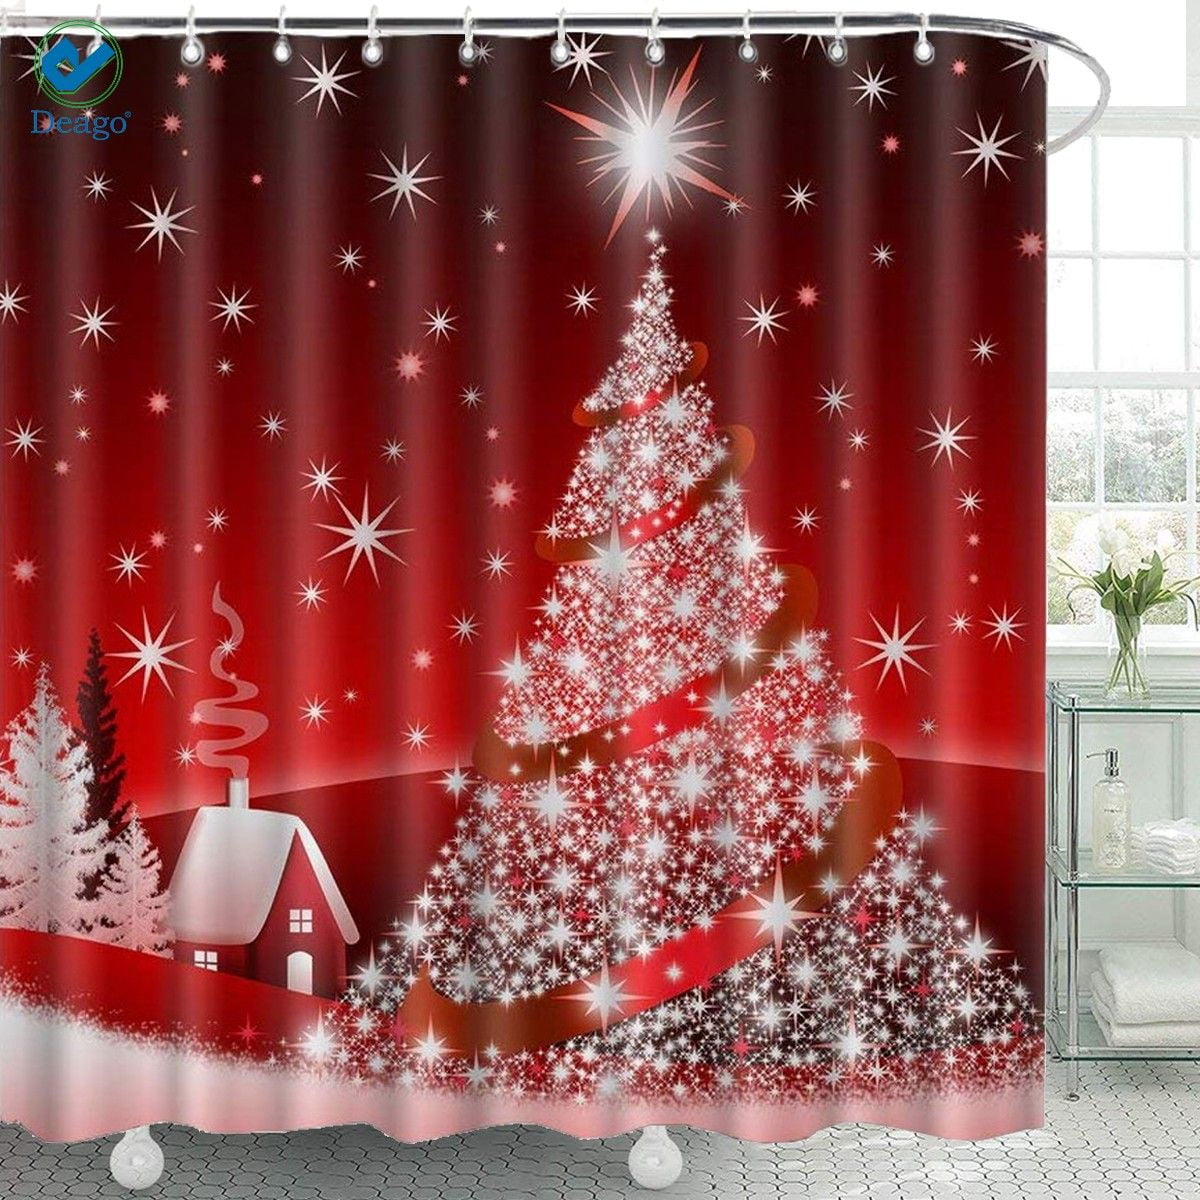 Christmas Shower Curtain Winter Snow Snowflakes Christmas Tree with Ornaments B 